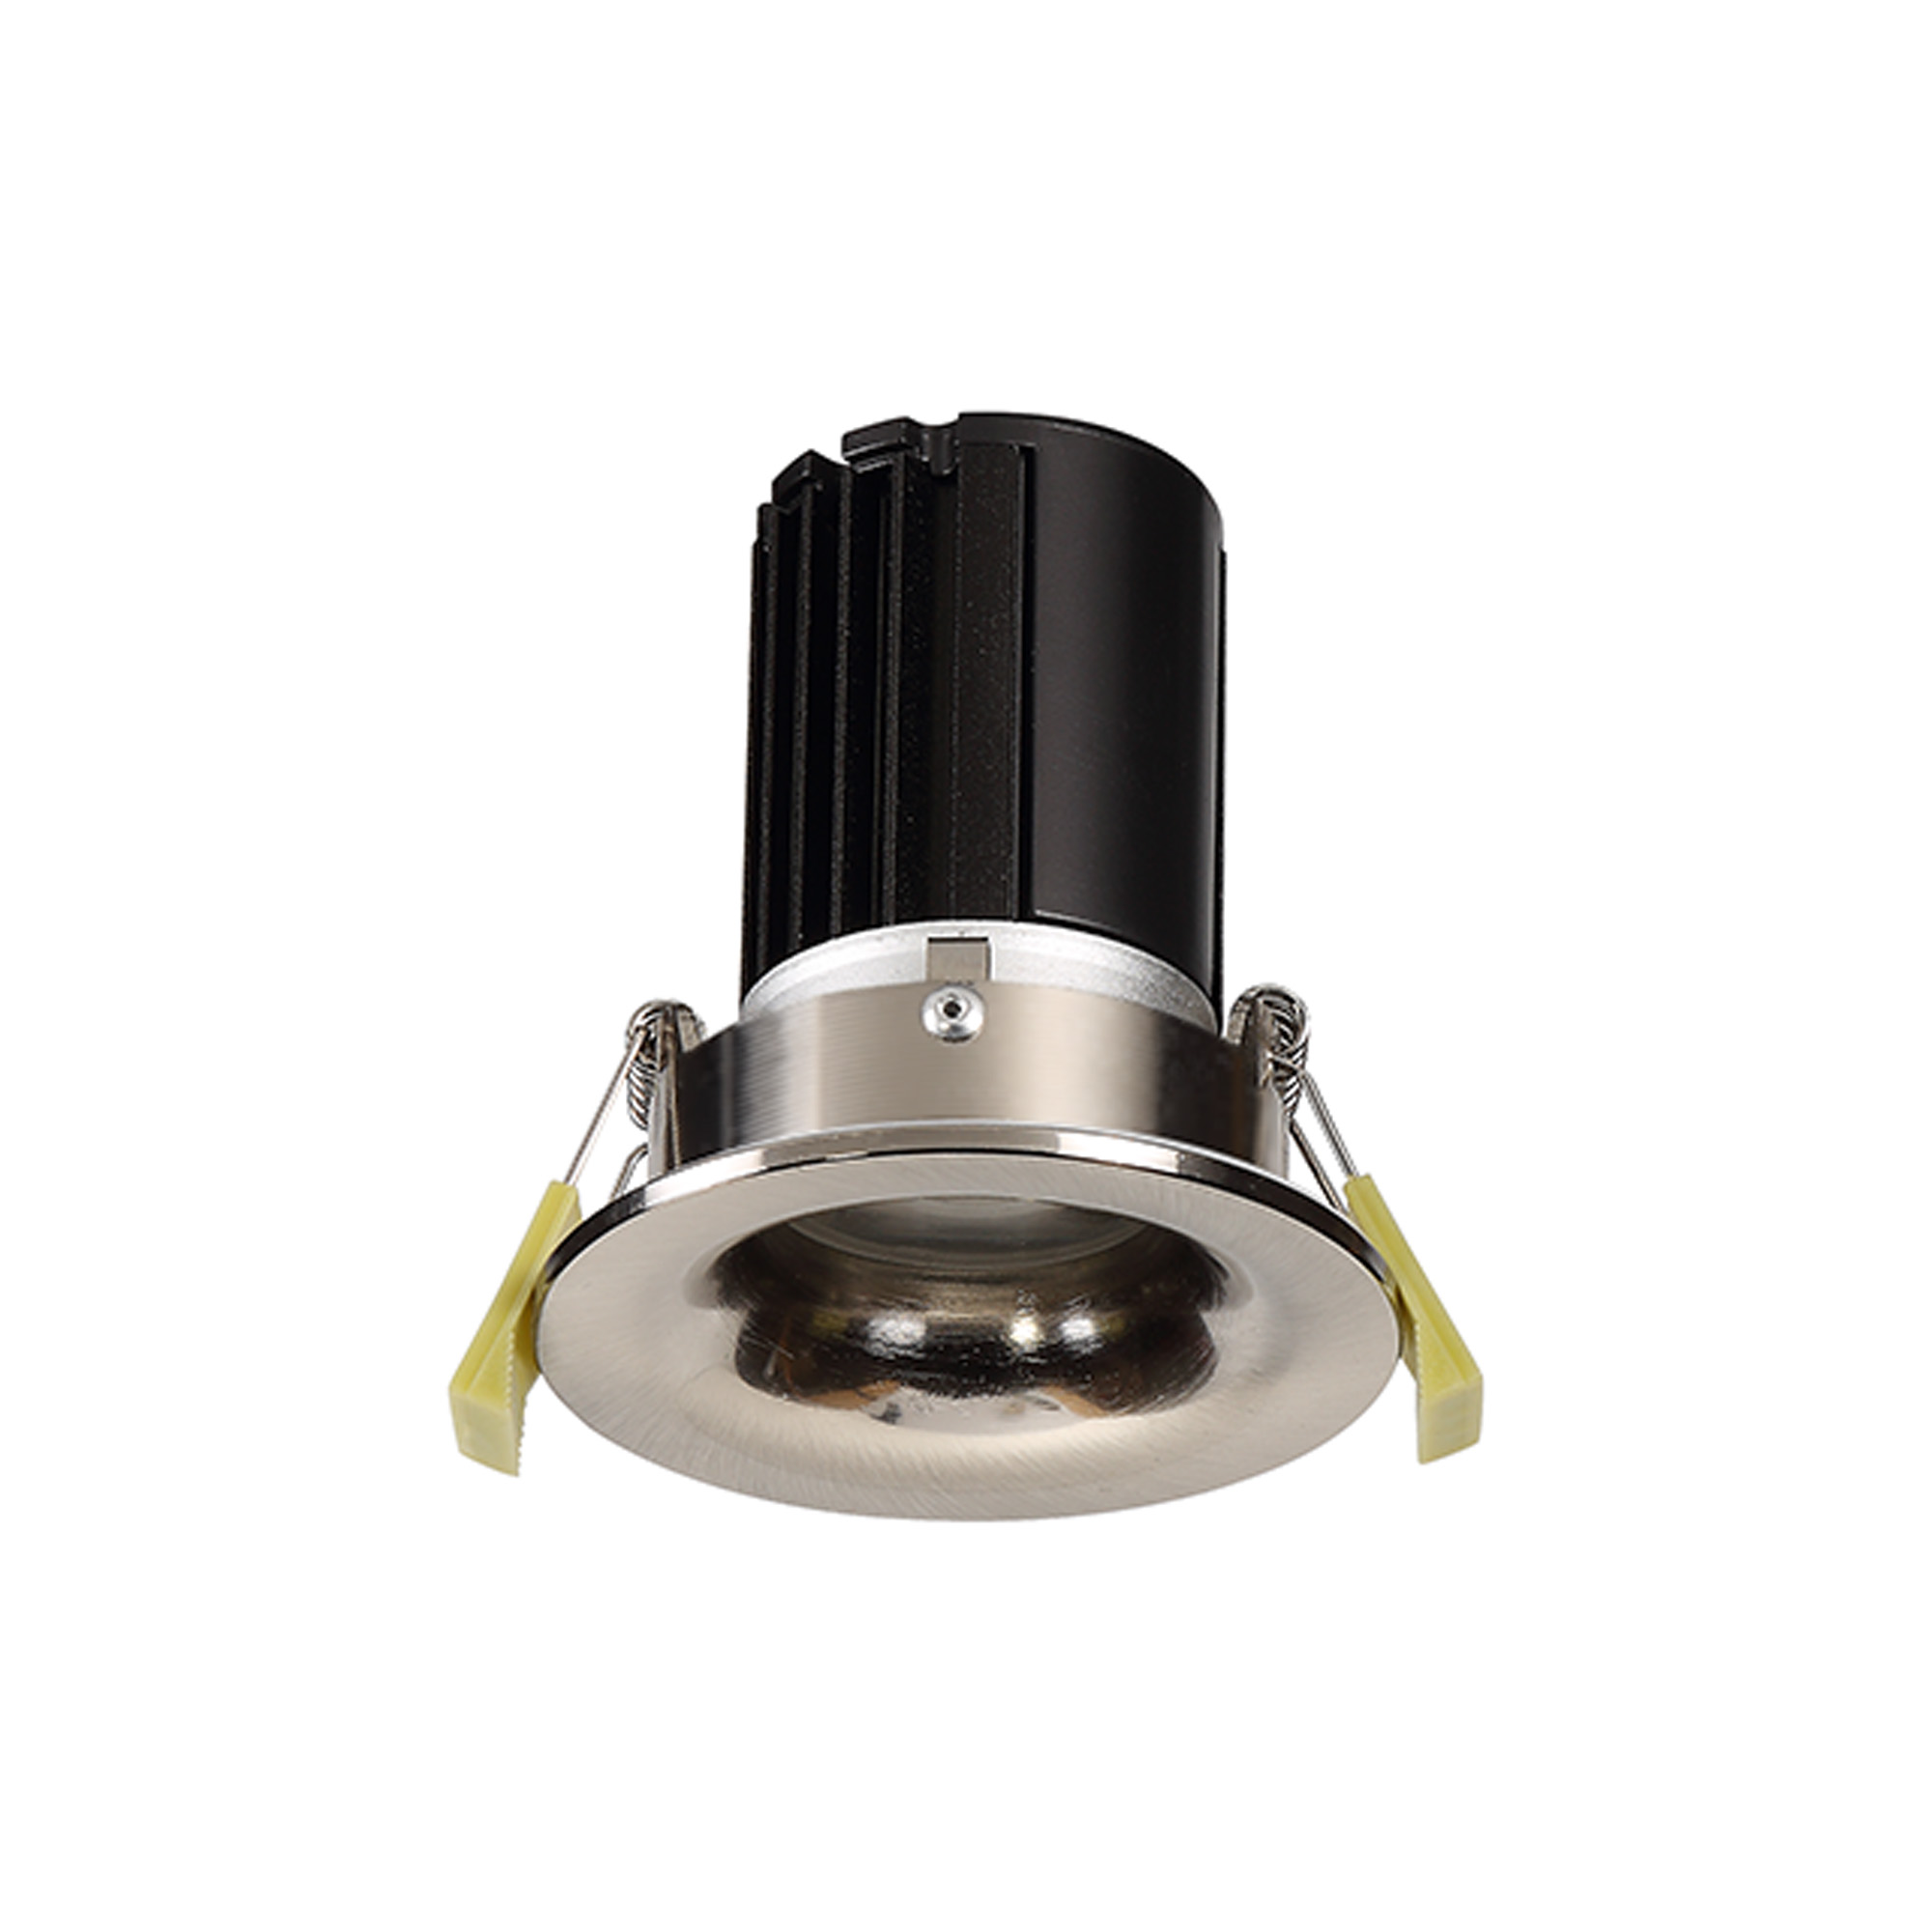 DM201546  Bruve 12 Tridonic powered 12W 2700K 1200lm 12° LED Engine,350mA , CRI>90 LED Engine Satin Nickel Fixed Round Recessed Downlight, Inner Glass cover, IP65